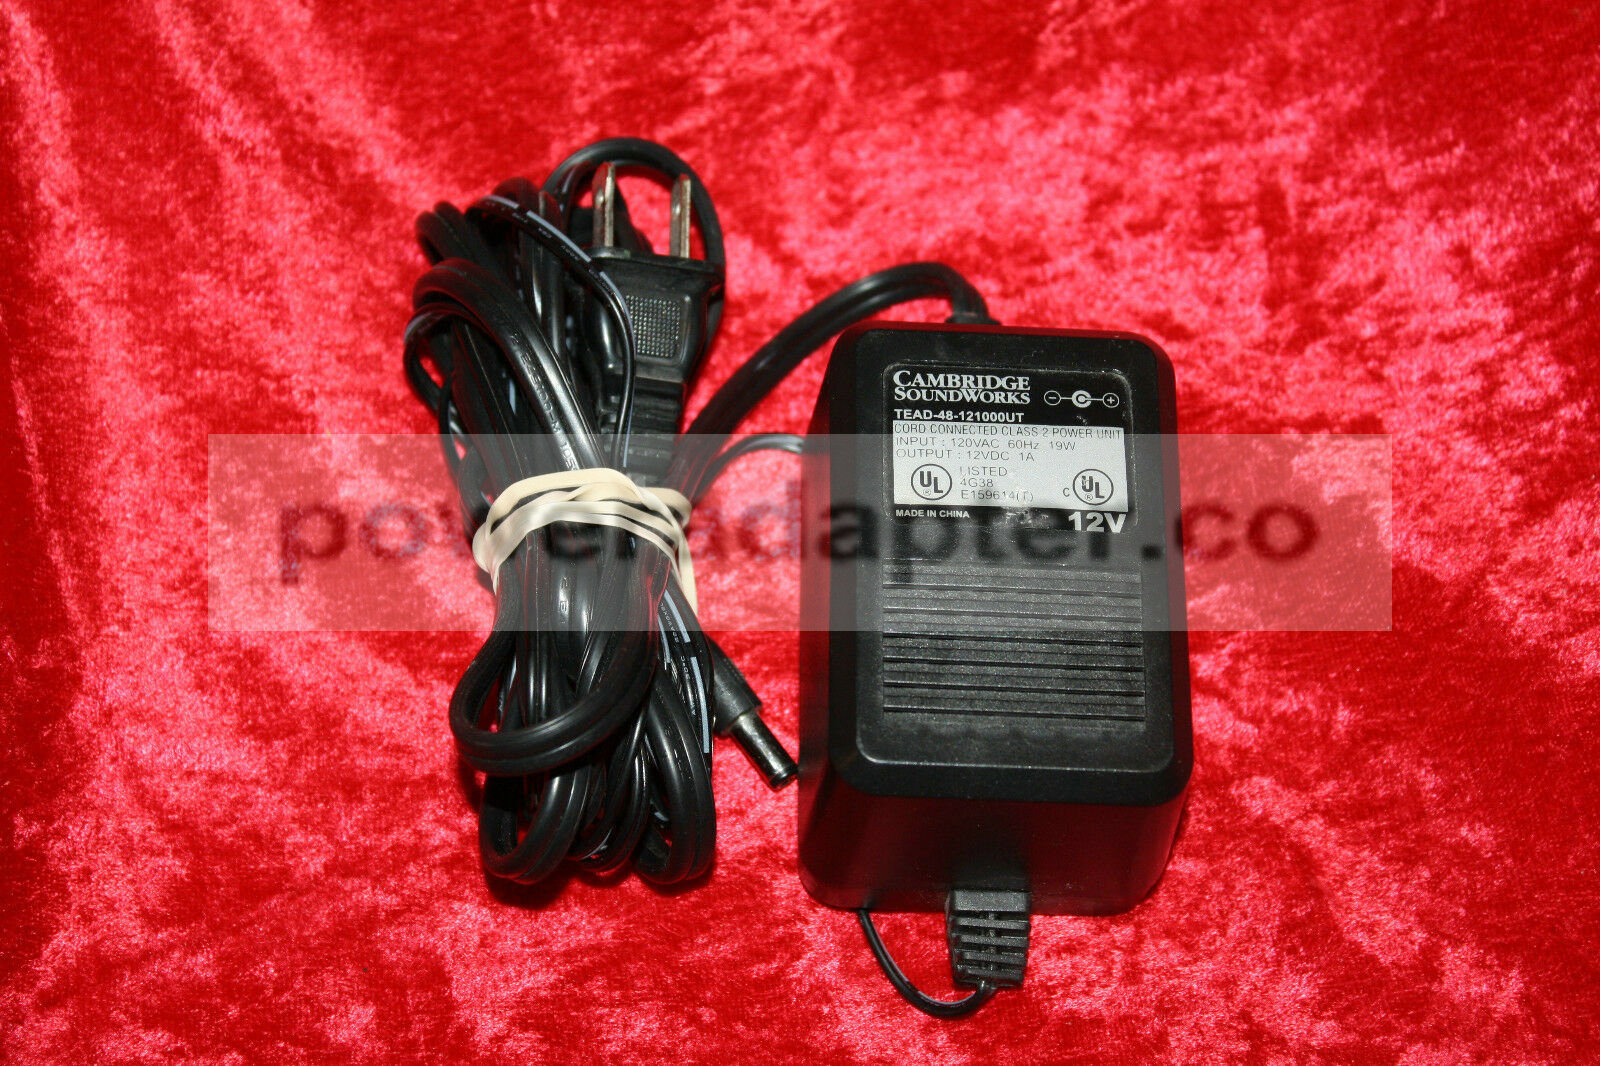 Cambridge SoundWorks Wall Power Supply AC adapter 12V DC TEAD-48-121000UT Condition: Used: An item that has been u